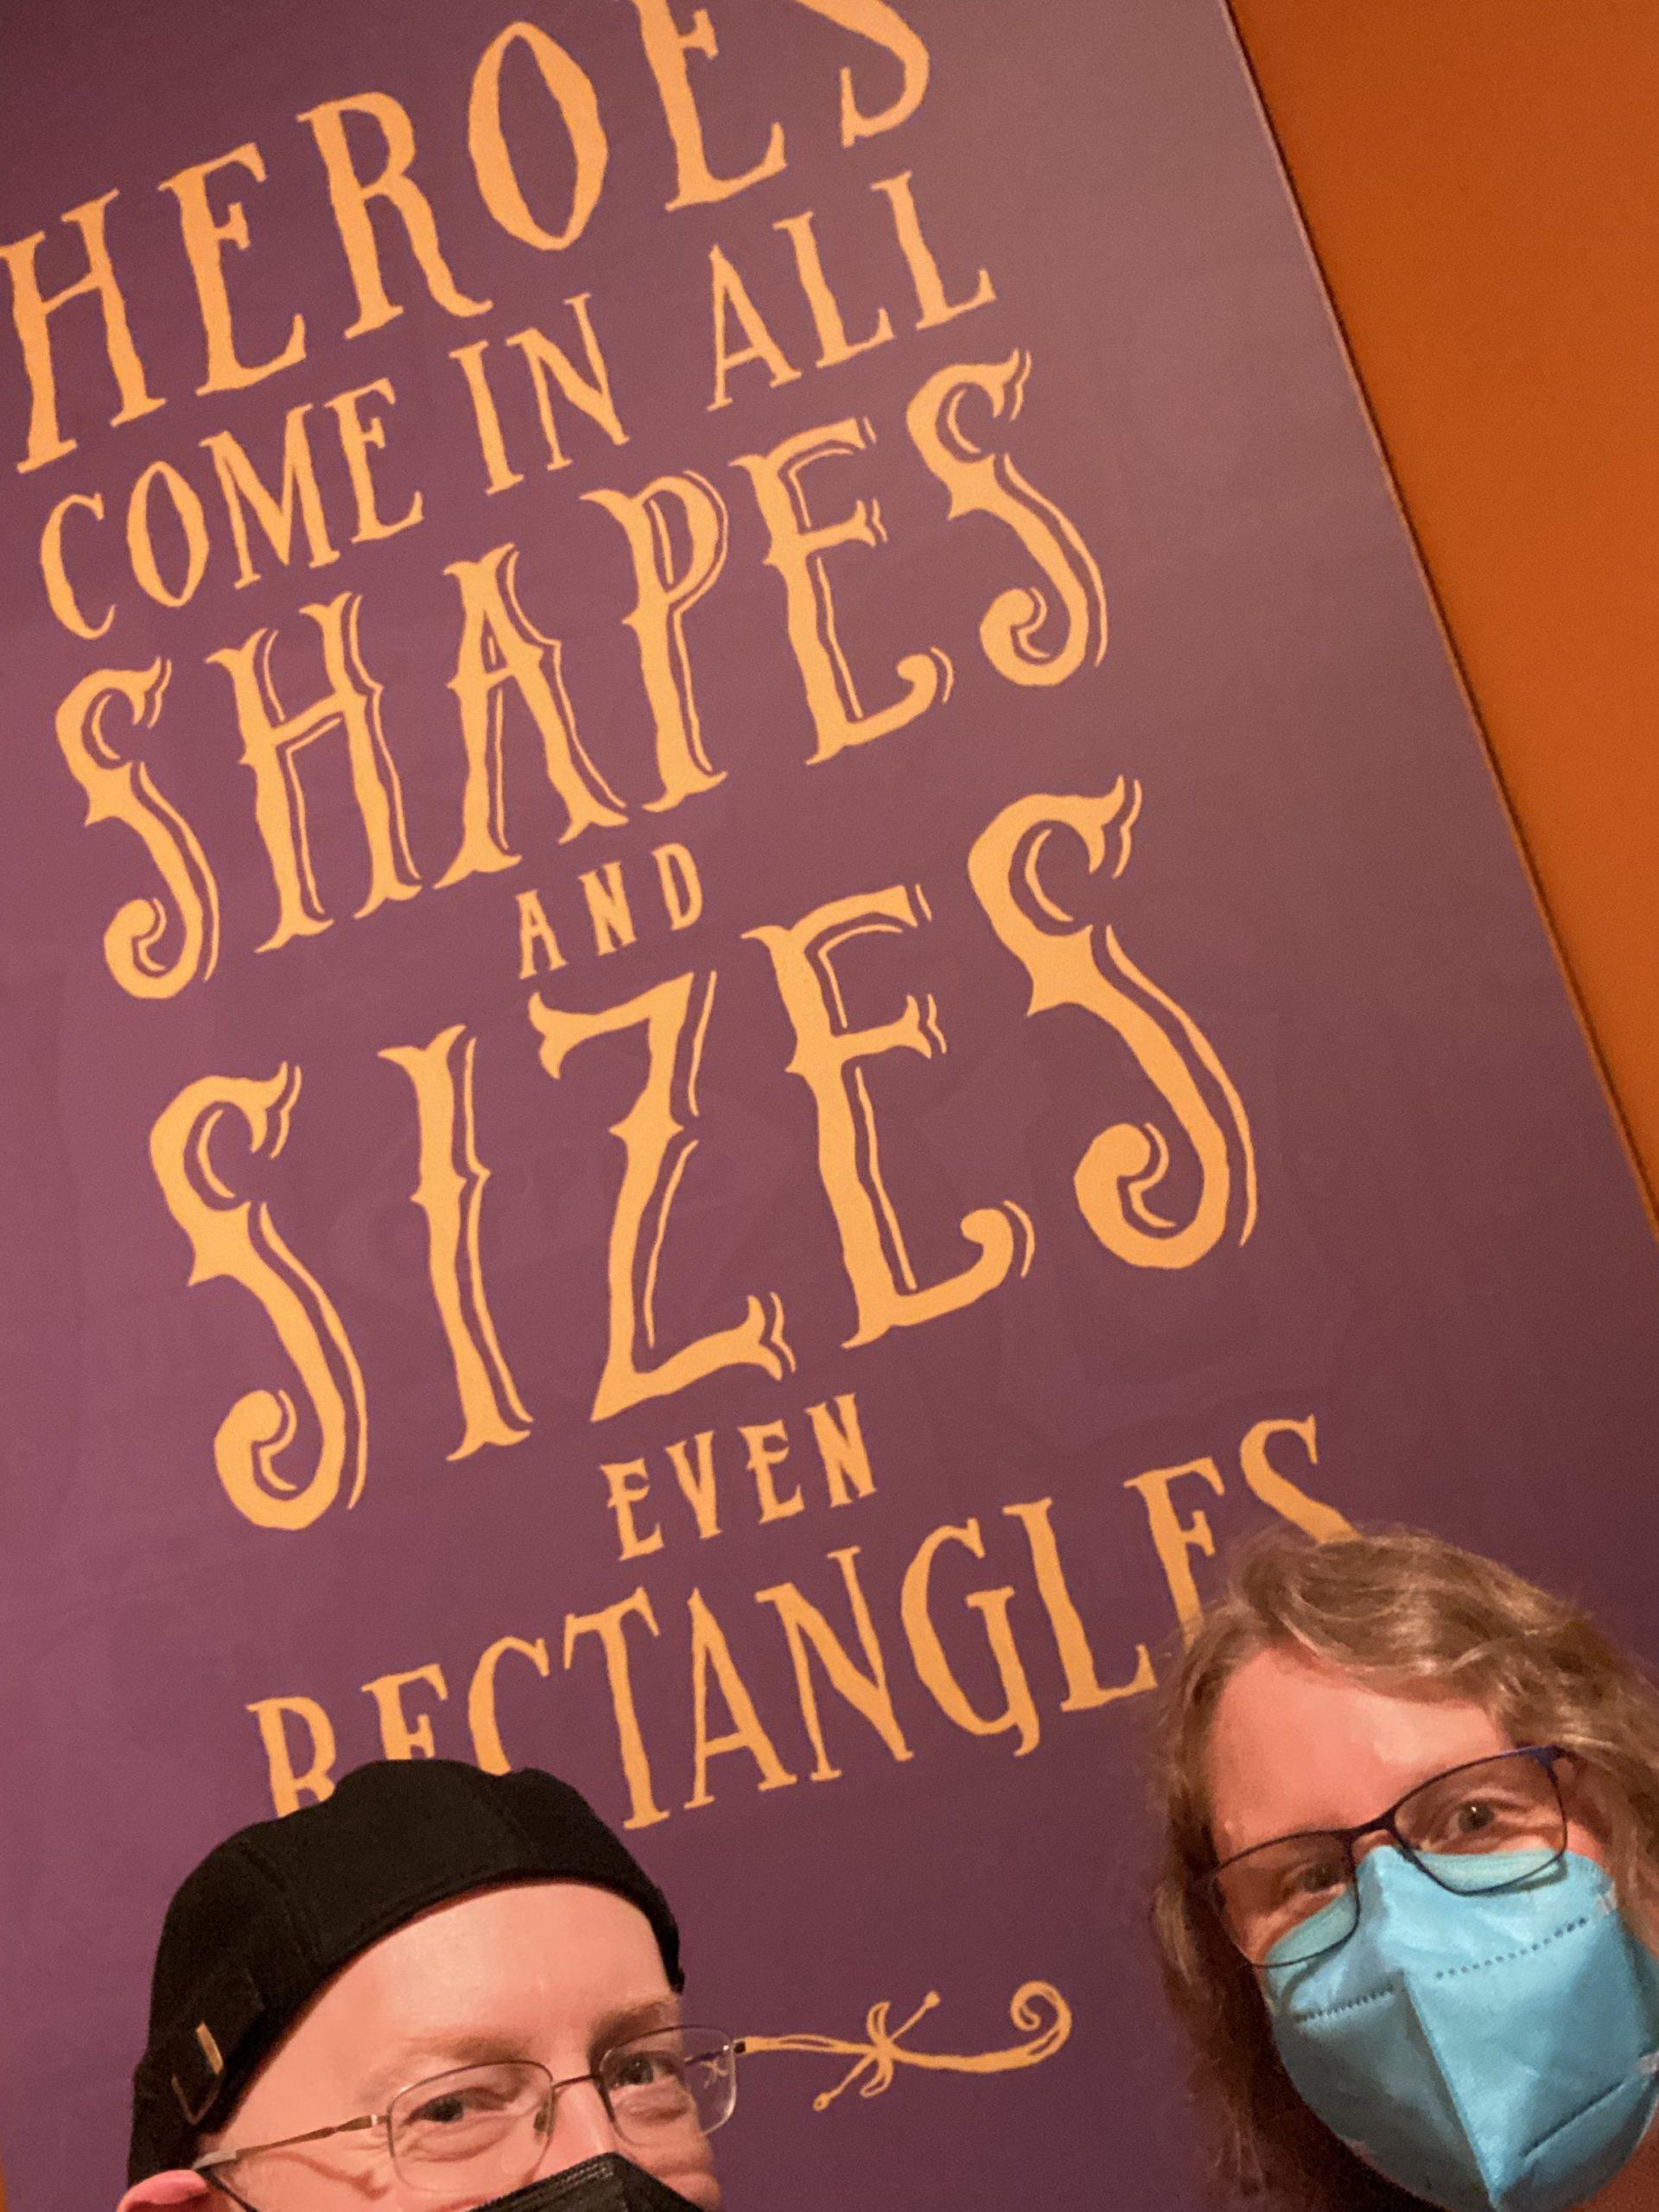 My wife and I in front of a sign saying "heroes come in all shapes and sizes even rectangles".